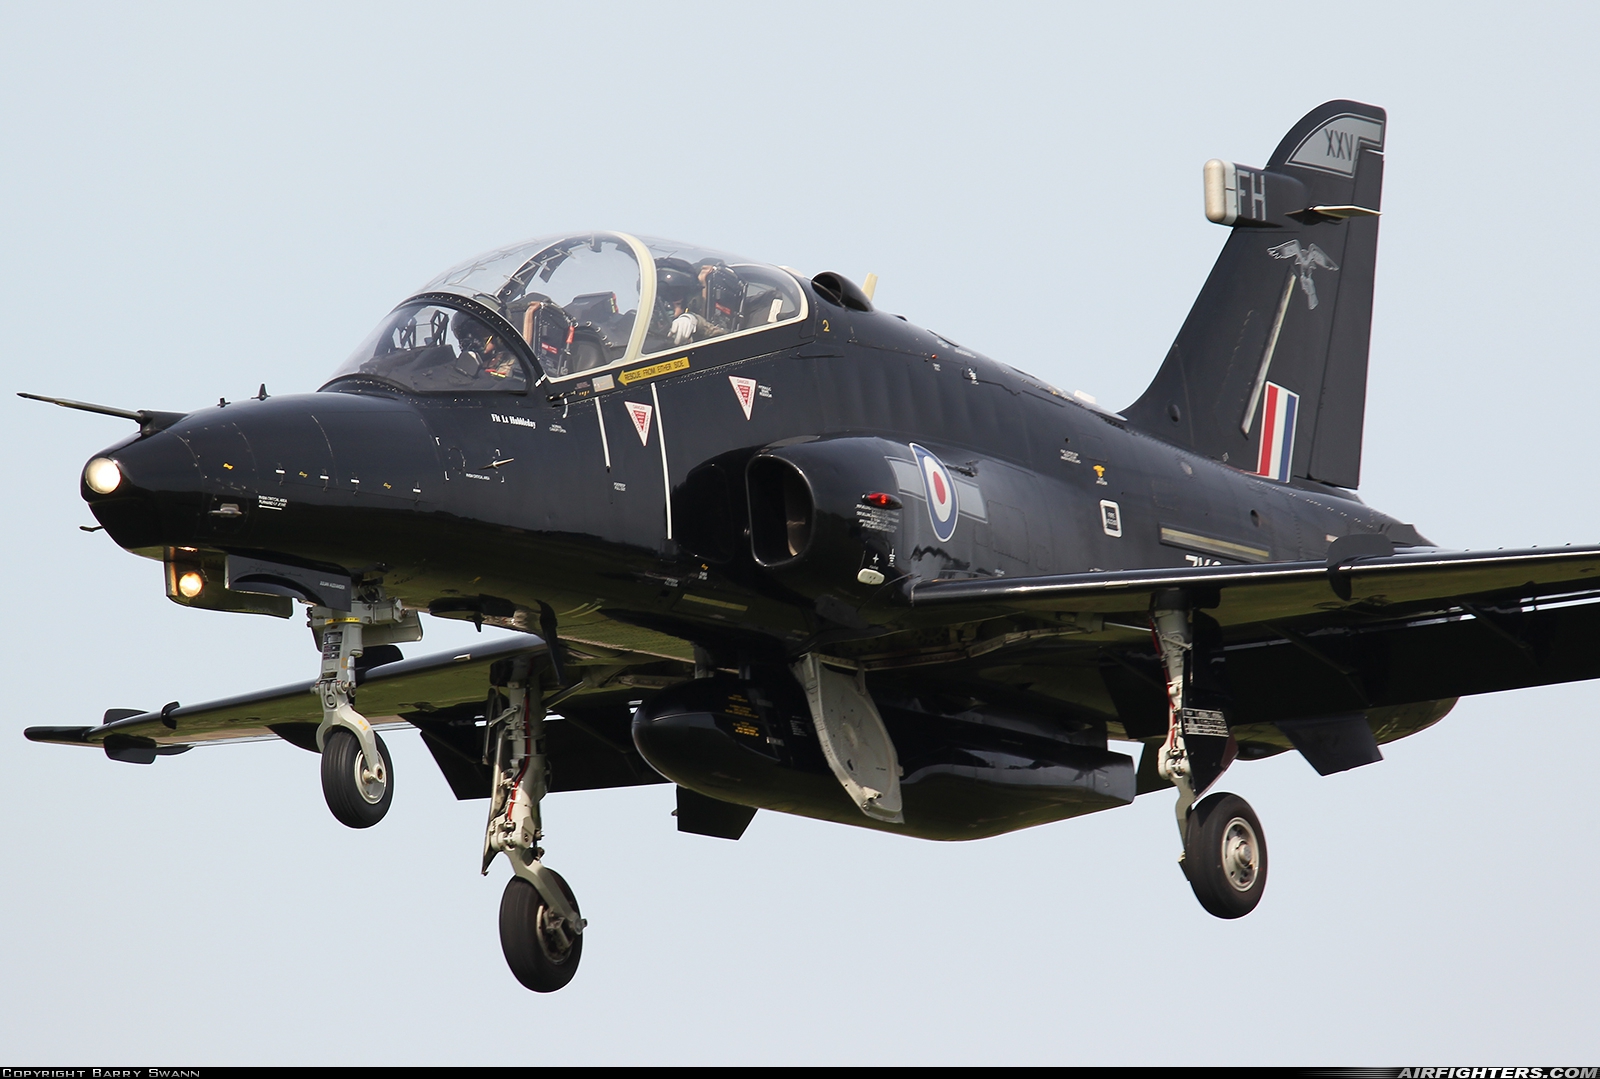 UK - Air Force BAE Systems Hawk T.2 ZK032 at Valley (EGOV), UK